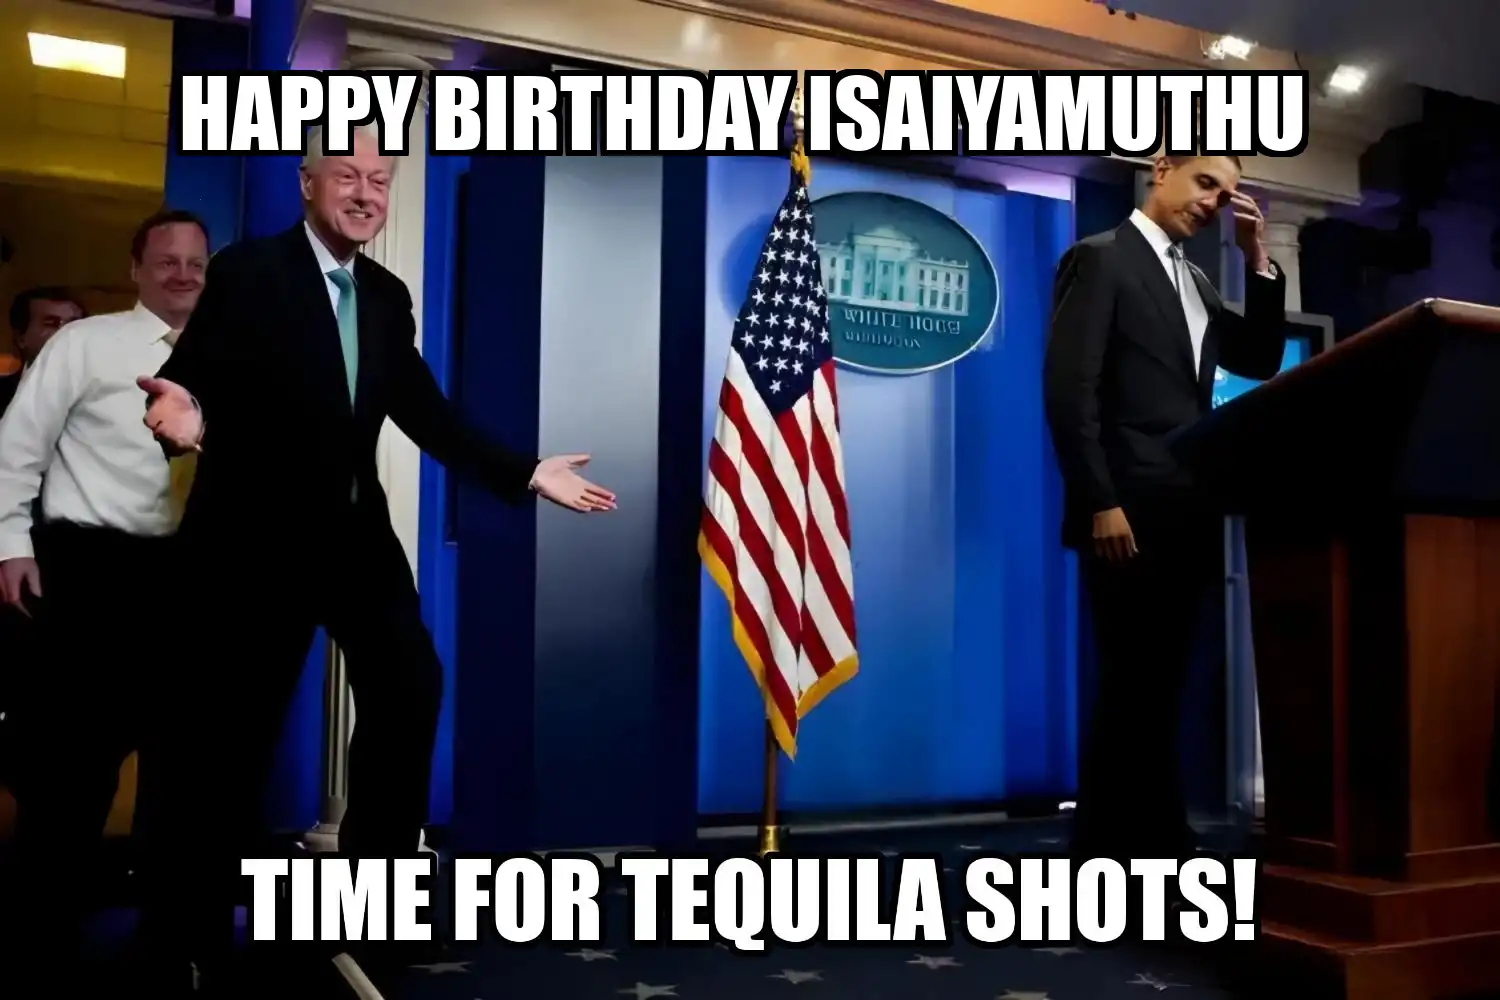 Happy Birthday Isaiyamuthu Time For Tequila Shots Memes